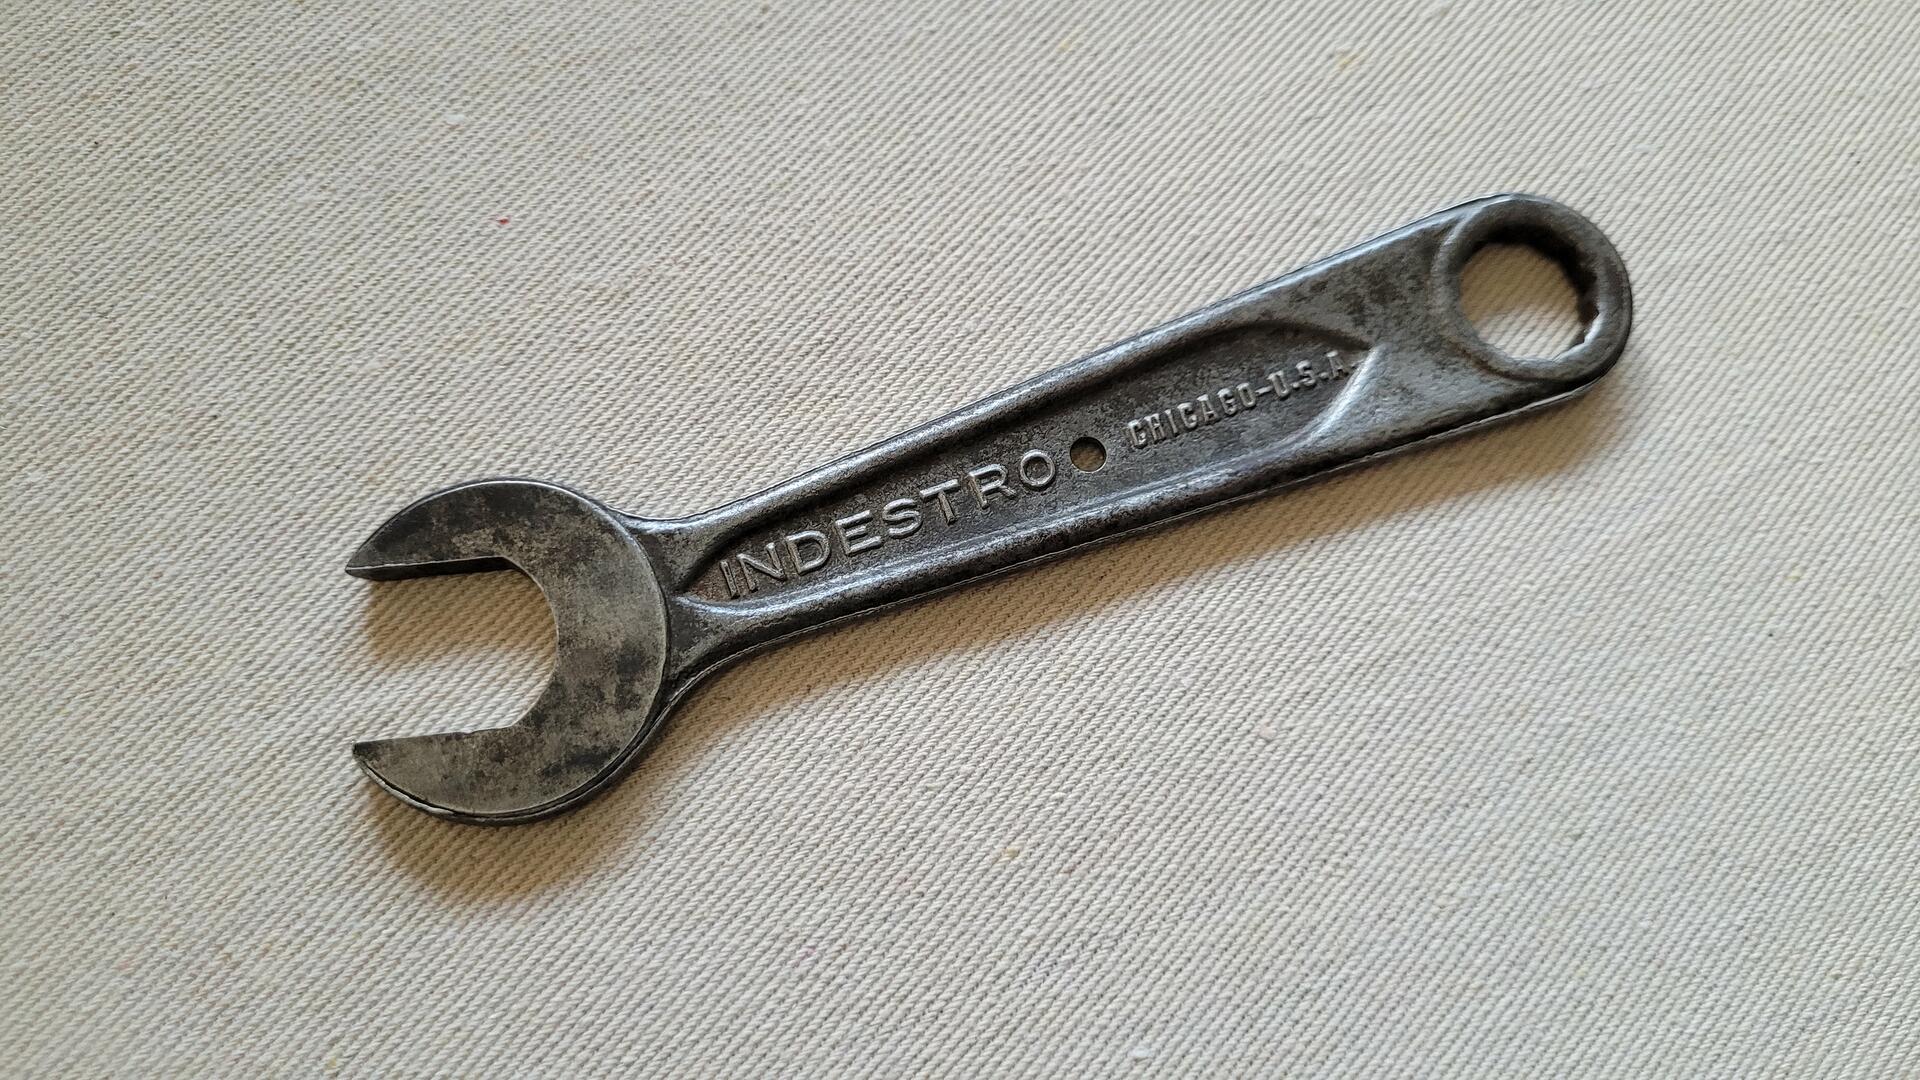 Vintage Indestro open box end combination wrench drop forged select steel 3/4 and 5/8 inch. Antique made in Chicago USA collectible mechanic hand tools